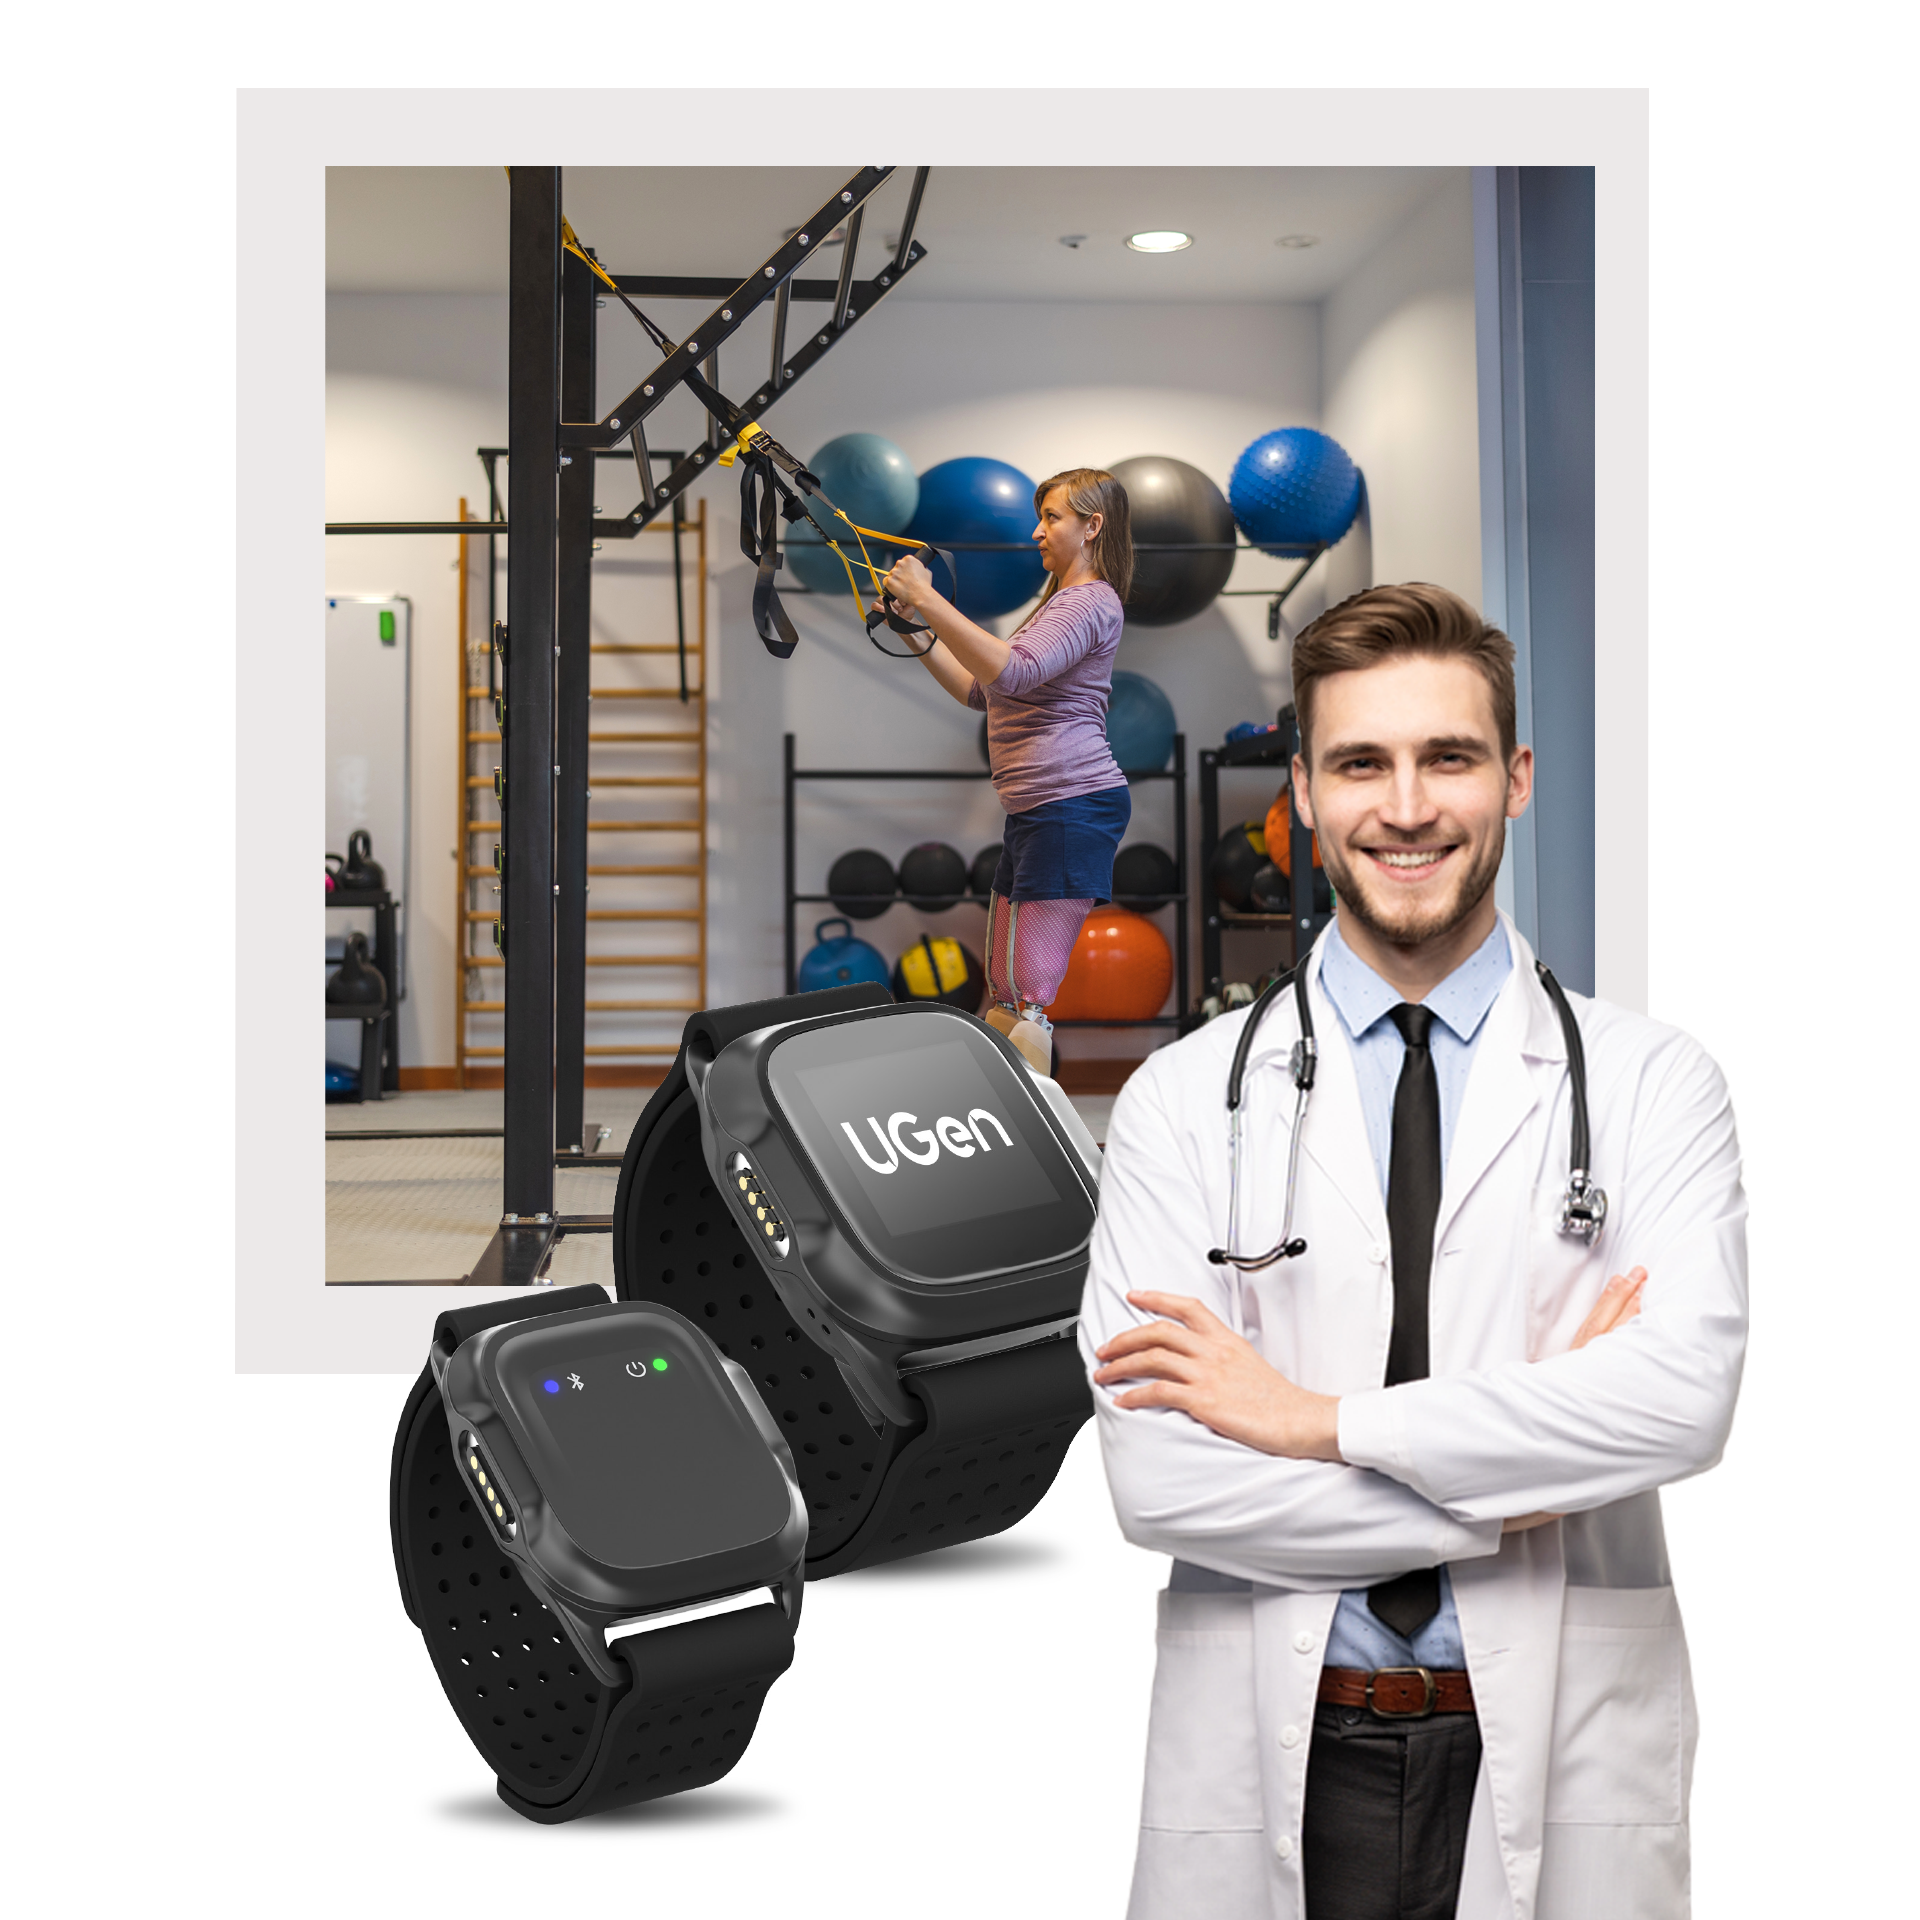 Physical therapist standing in front of image of UGen wearable device